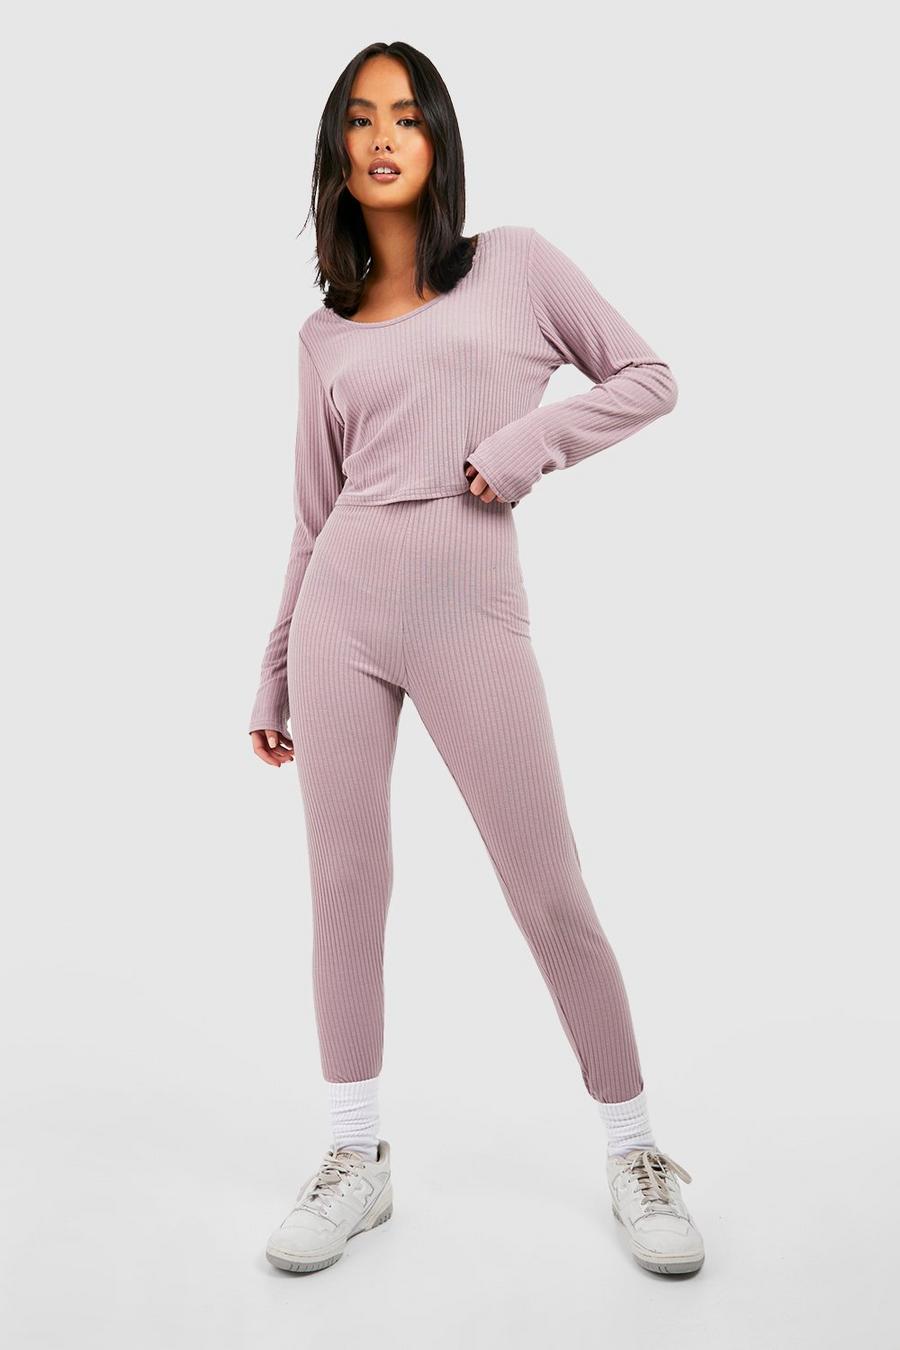 Grey Soft Rib Knit Long Sleeve Top And Leggings Co-ord